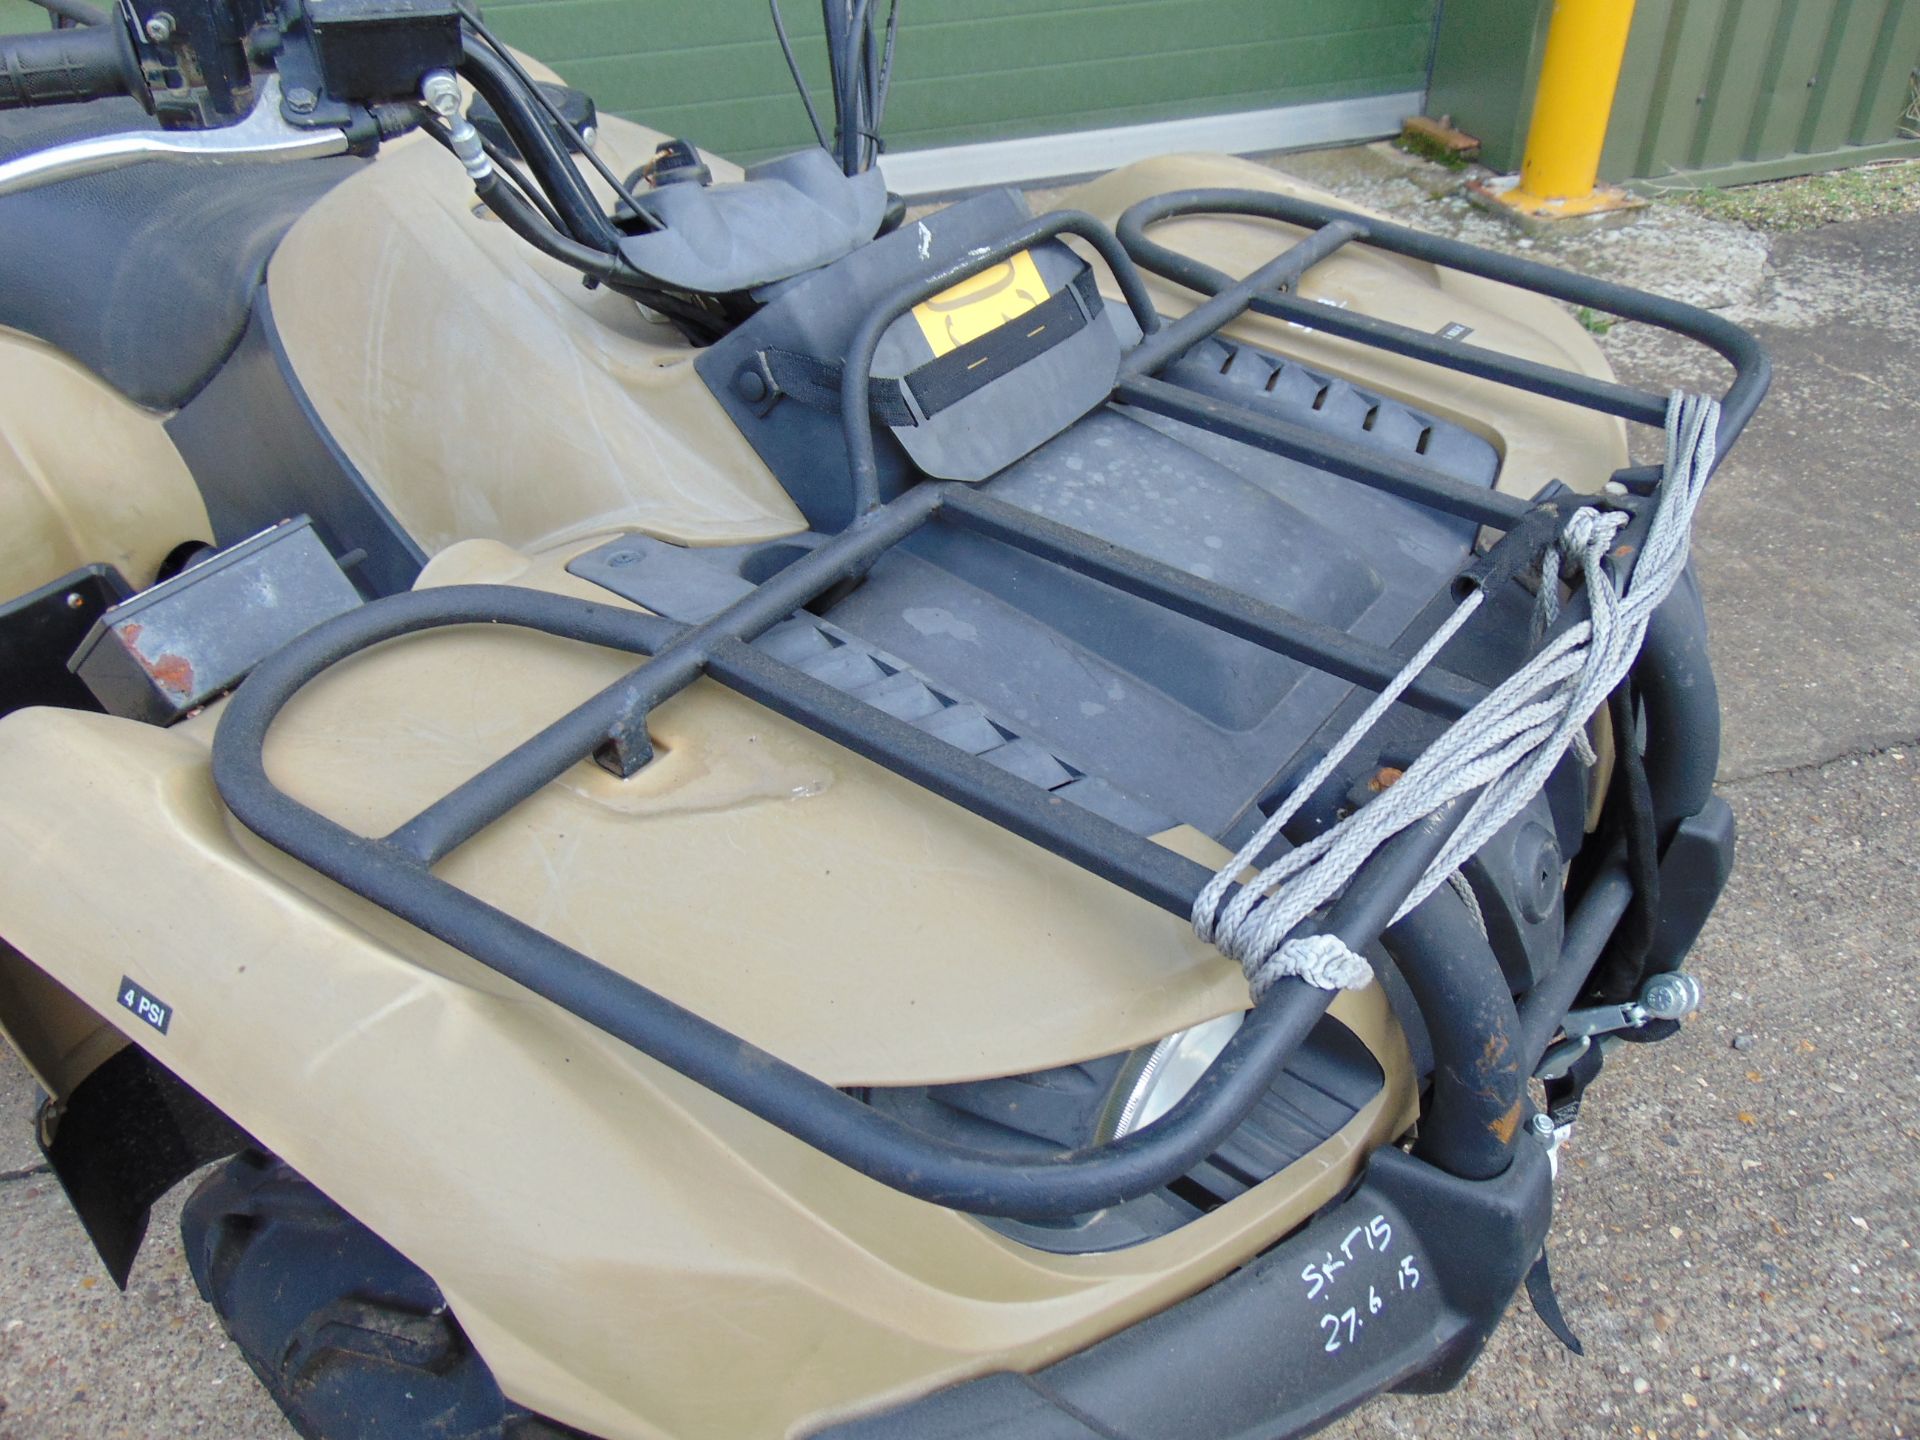 Military Specification Yamaha Grizzly 450 4 x 4 ATV Quad Bike Complete with Winch ONLY 591 HOURS! - Image 10 of 16